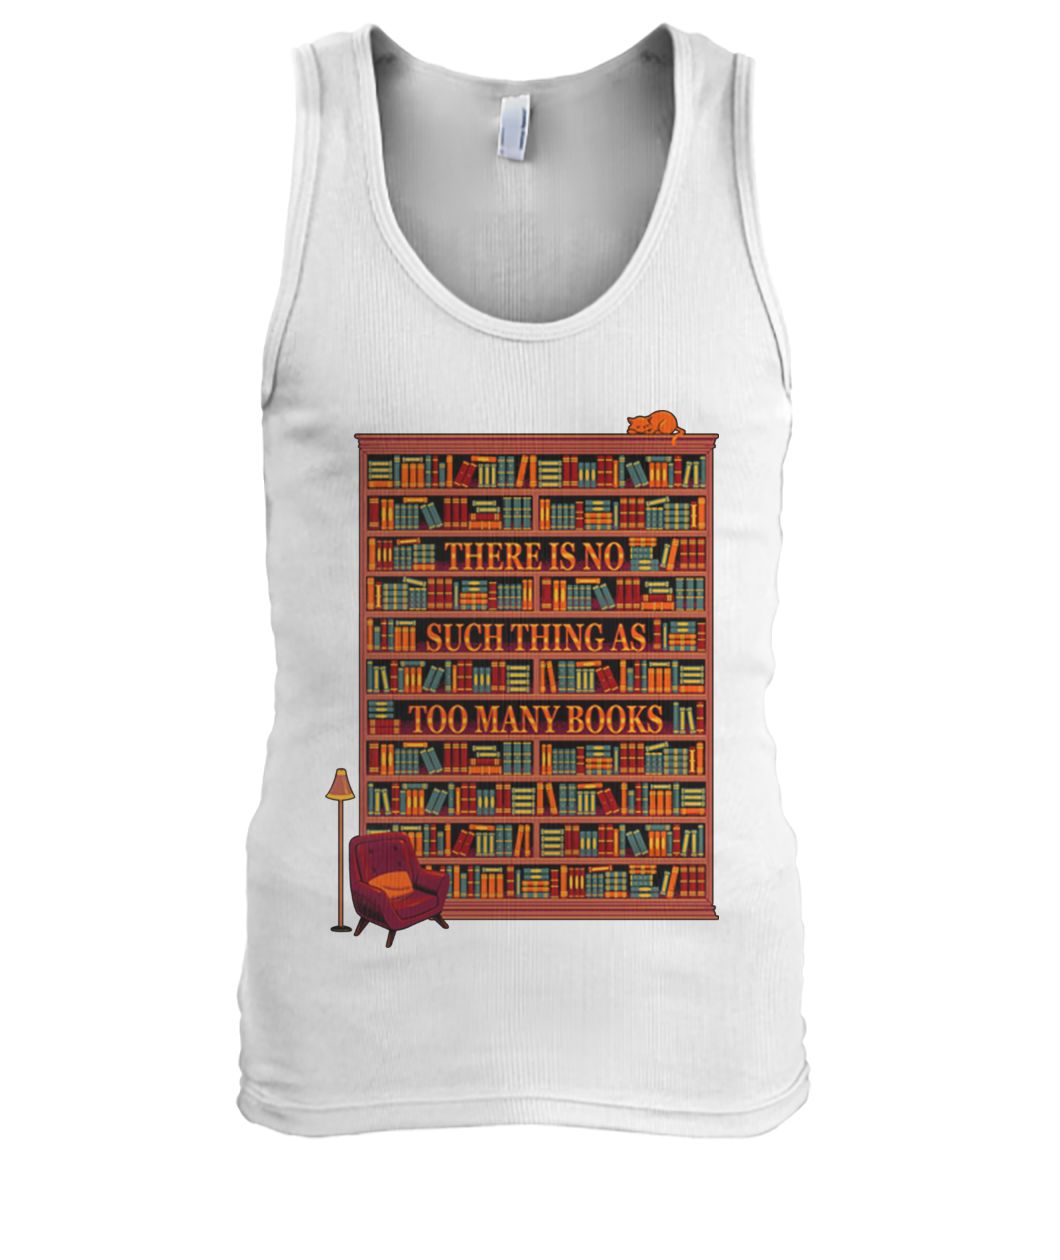 There is no such thing as too many books men's tank top